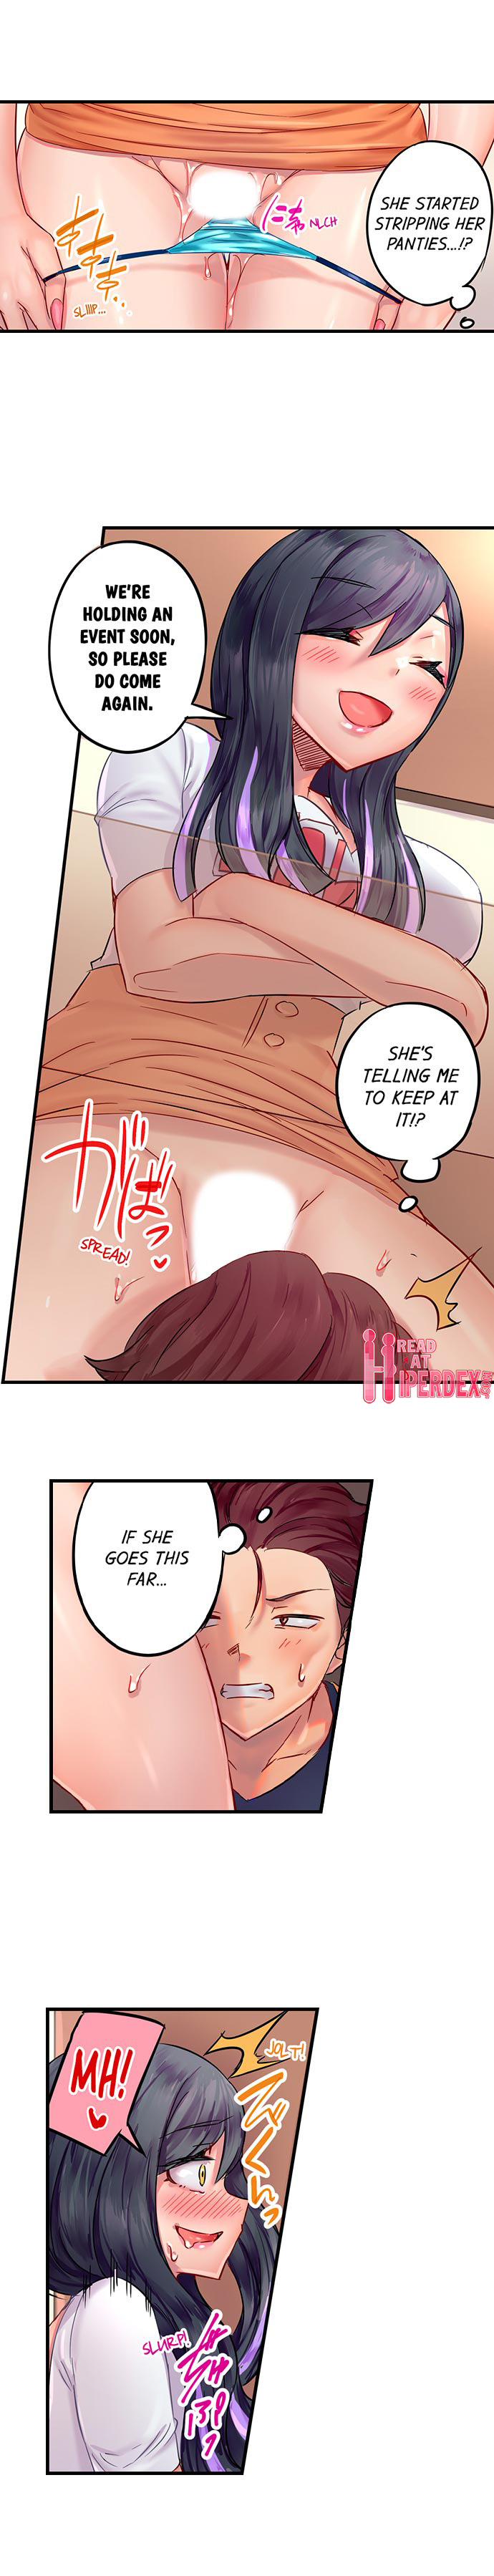 Orgasm Management for This Tanned Girl - Chapter 5 Page 6